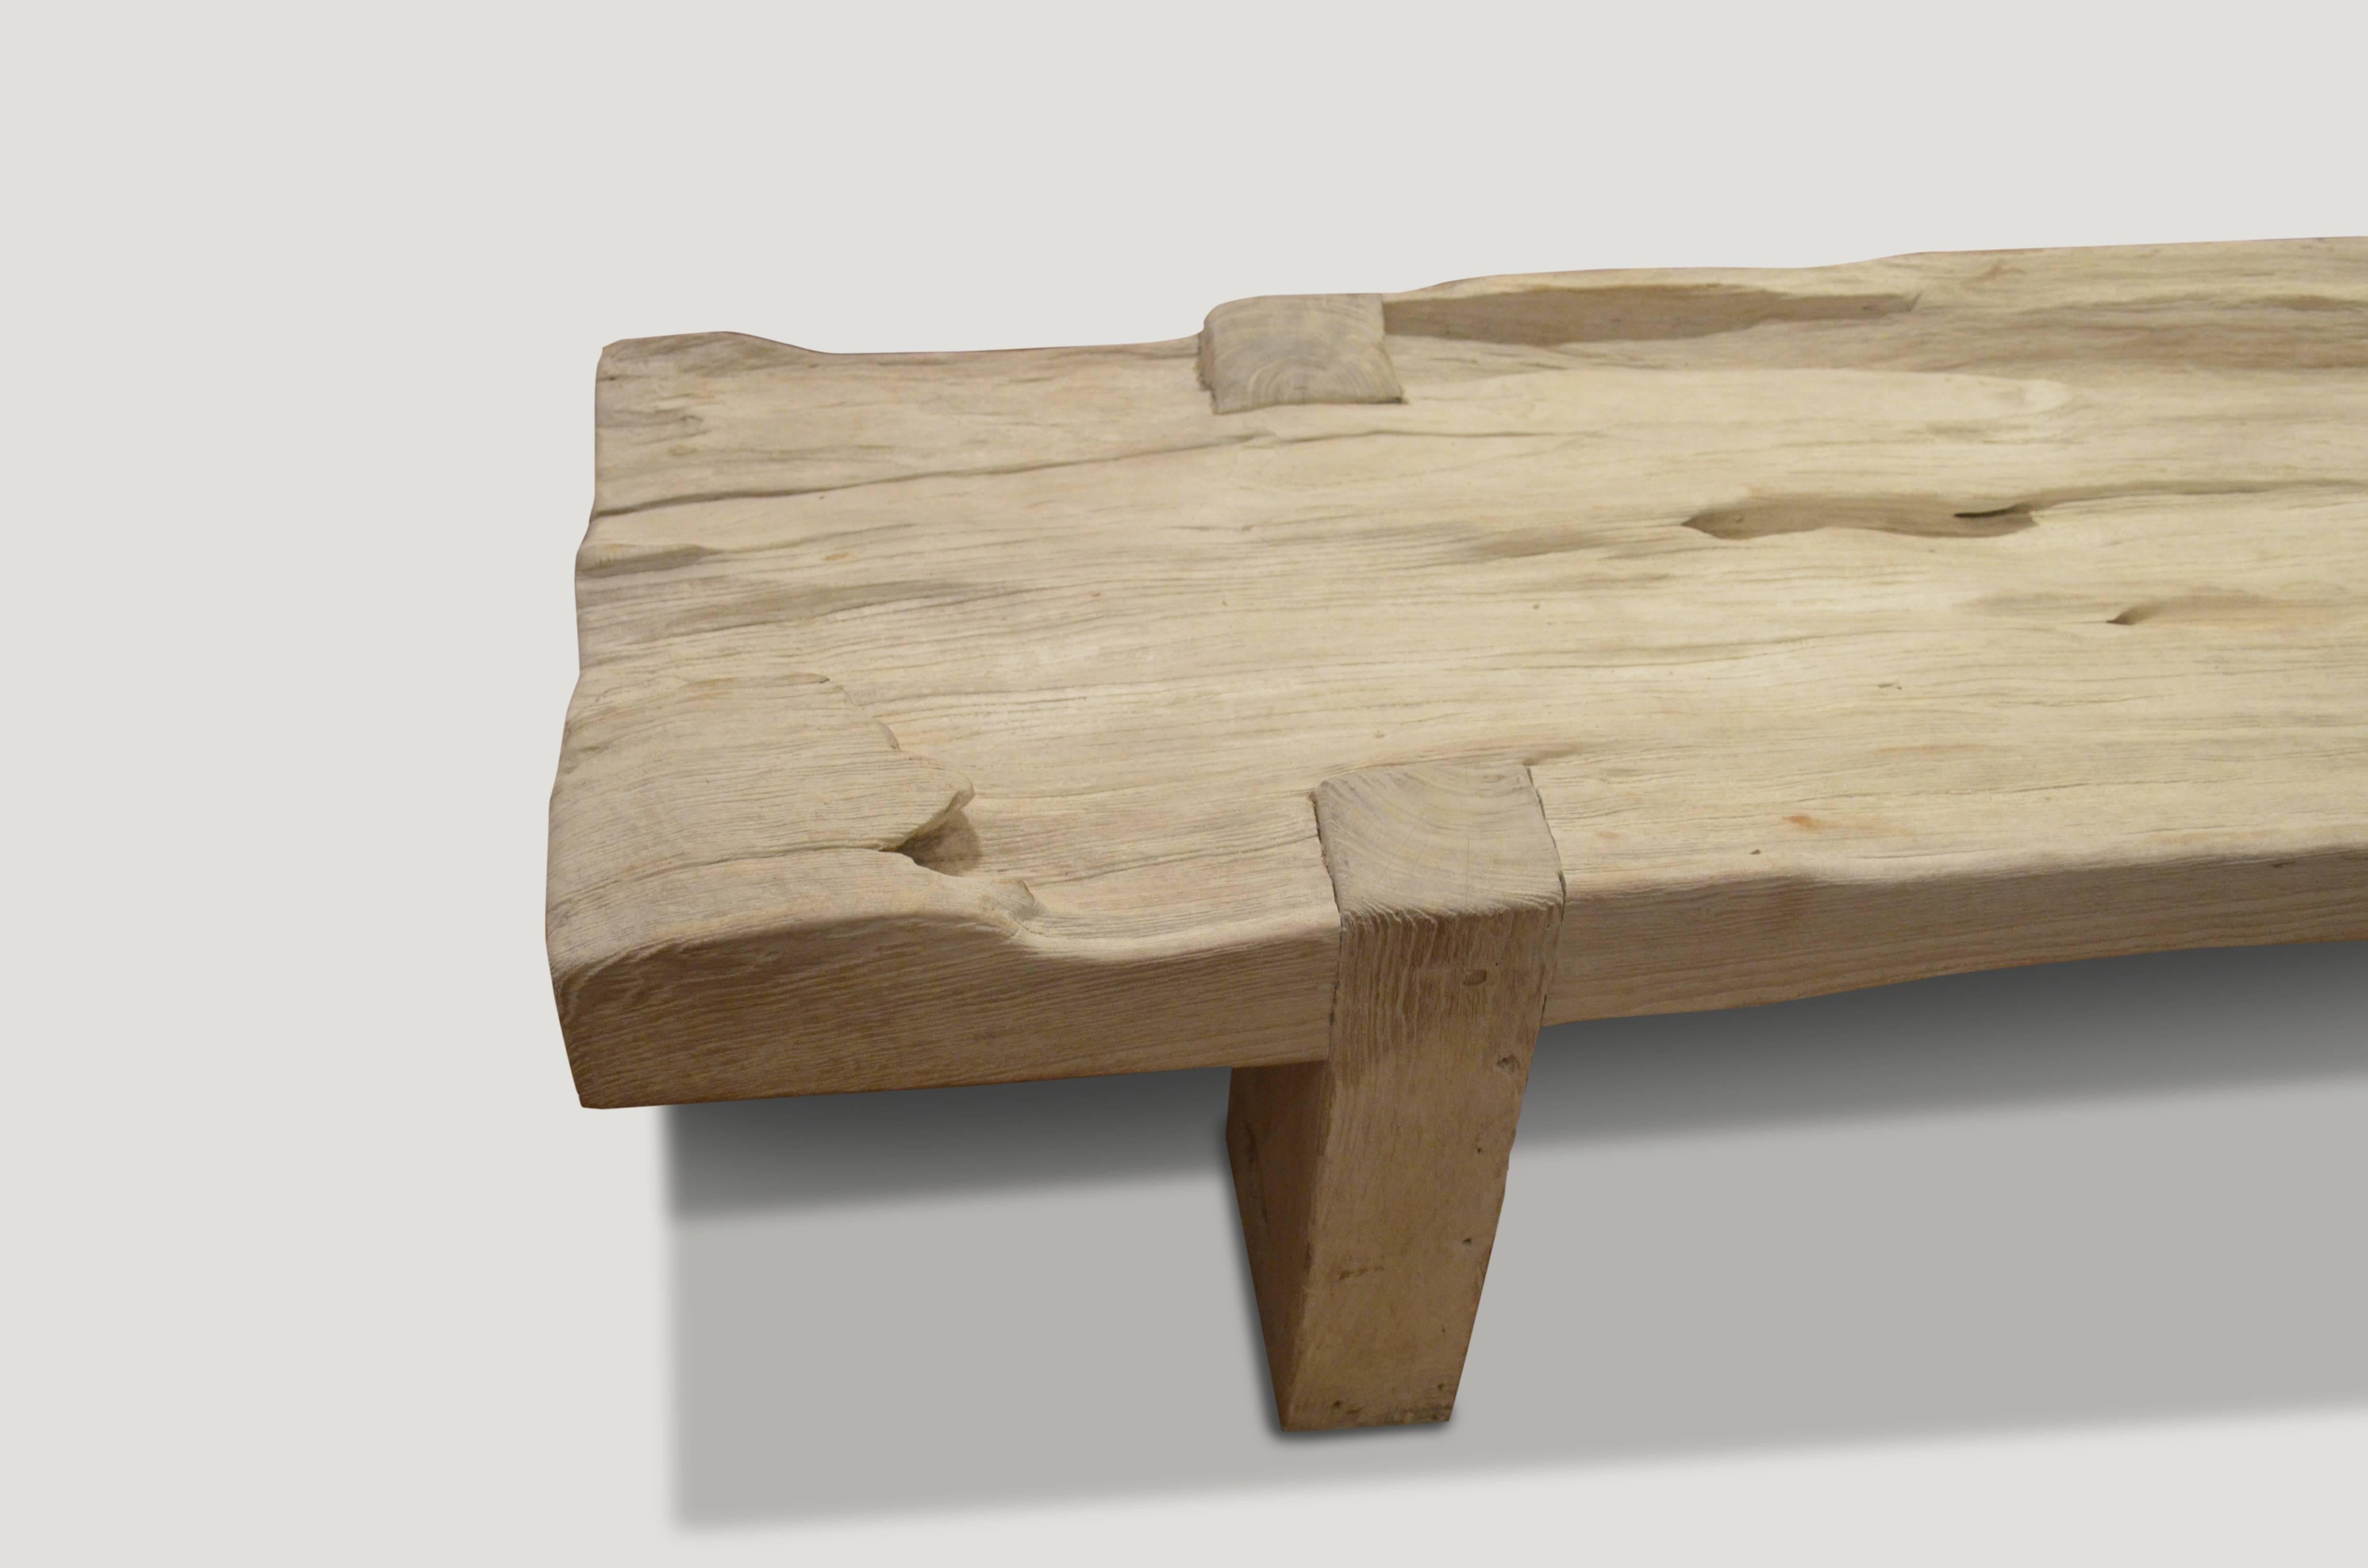 Natural eroded reclaimed teak wood slab bench or coffee table. We added the legs. Perfect for inside or outside living.

The St. Barts Collection features an exciting new line of organic white wash and natural weathered teak furniture. The reclaimed